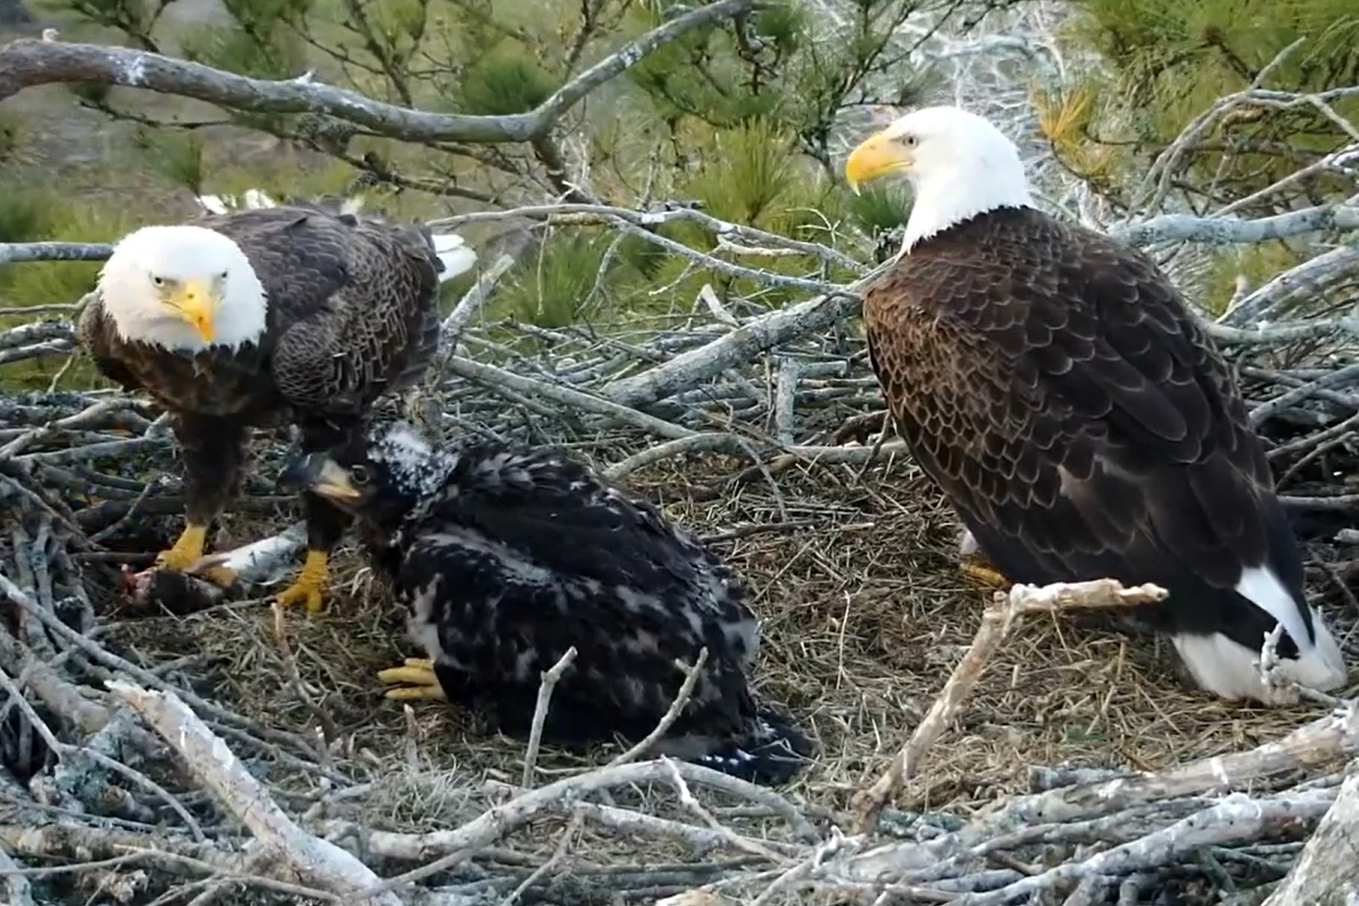 How thousands get to watch Houston-area baby eagle grow up